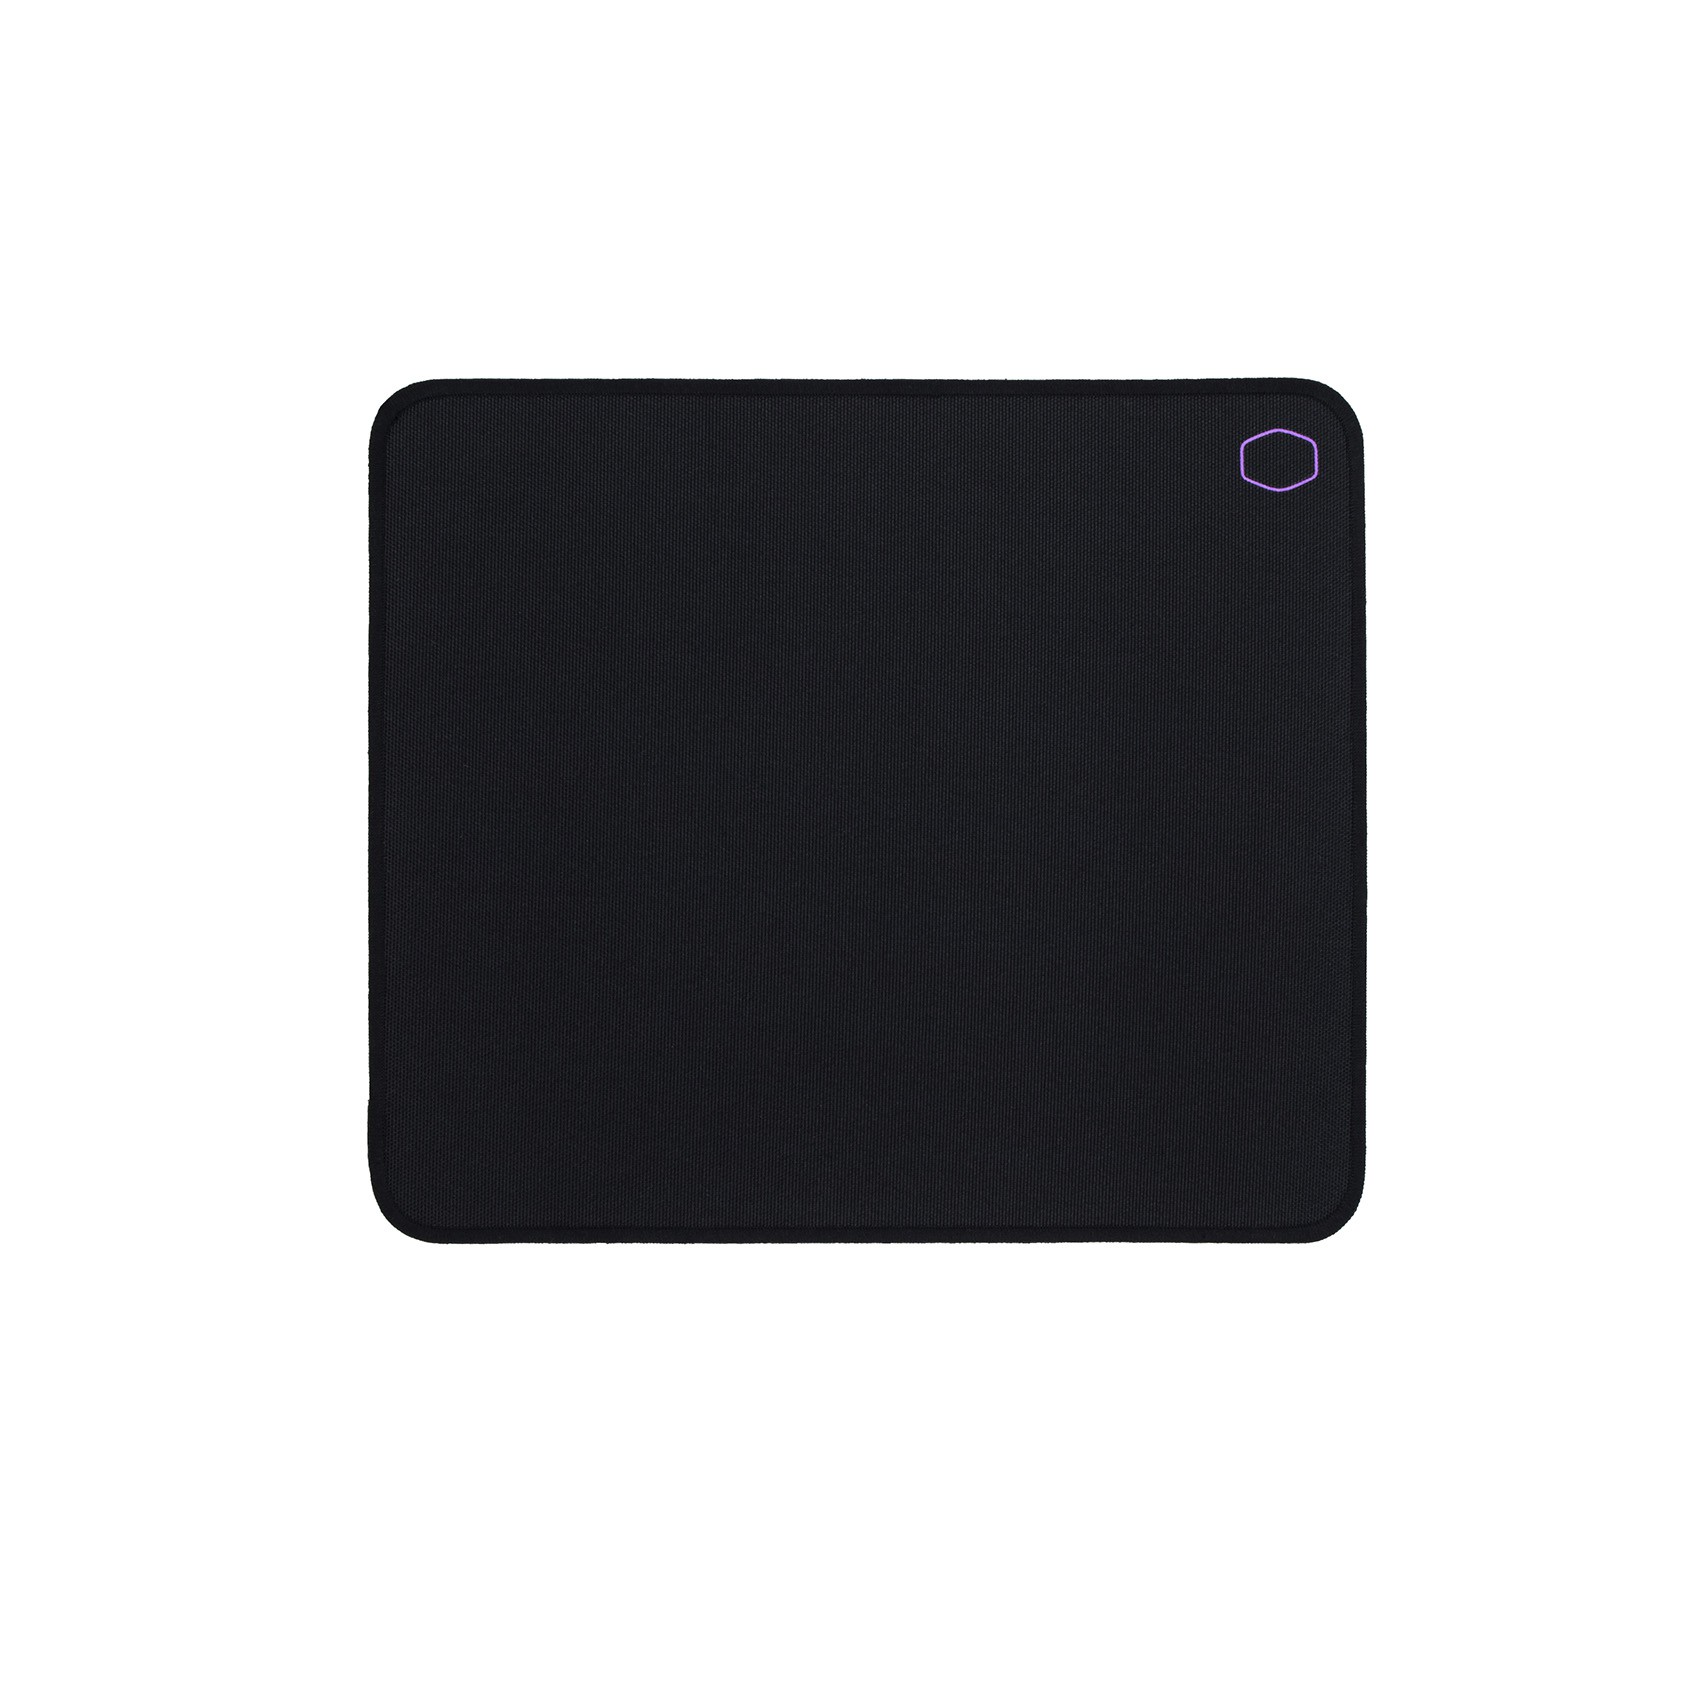 COOLER MASTER MASTERACCESSORY MP510 M MOUSE PAD 320X270MM